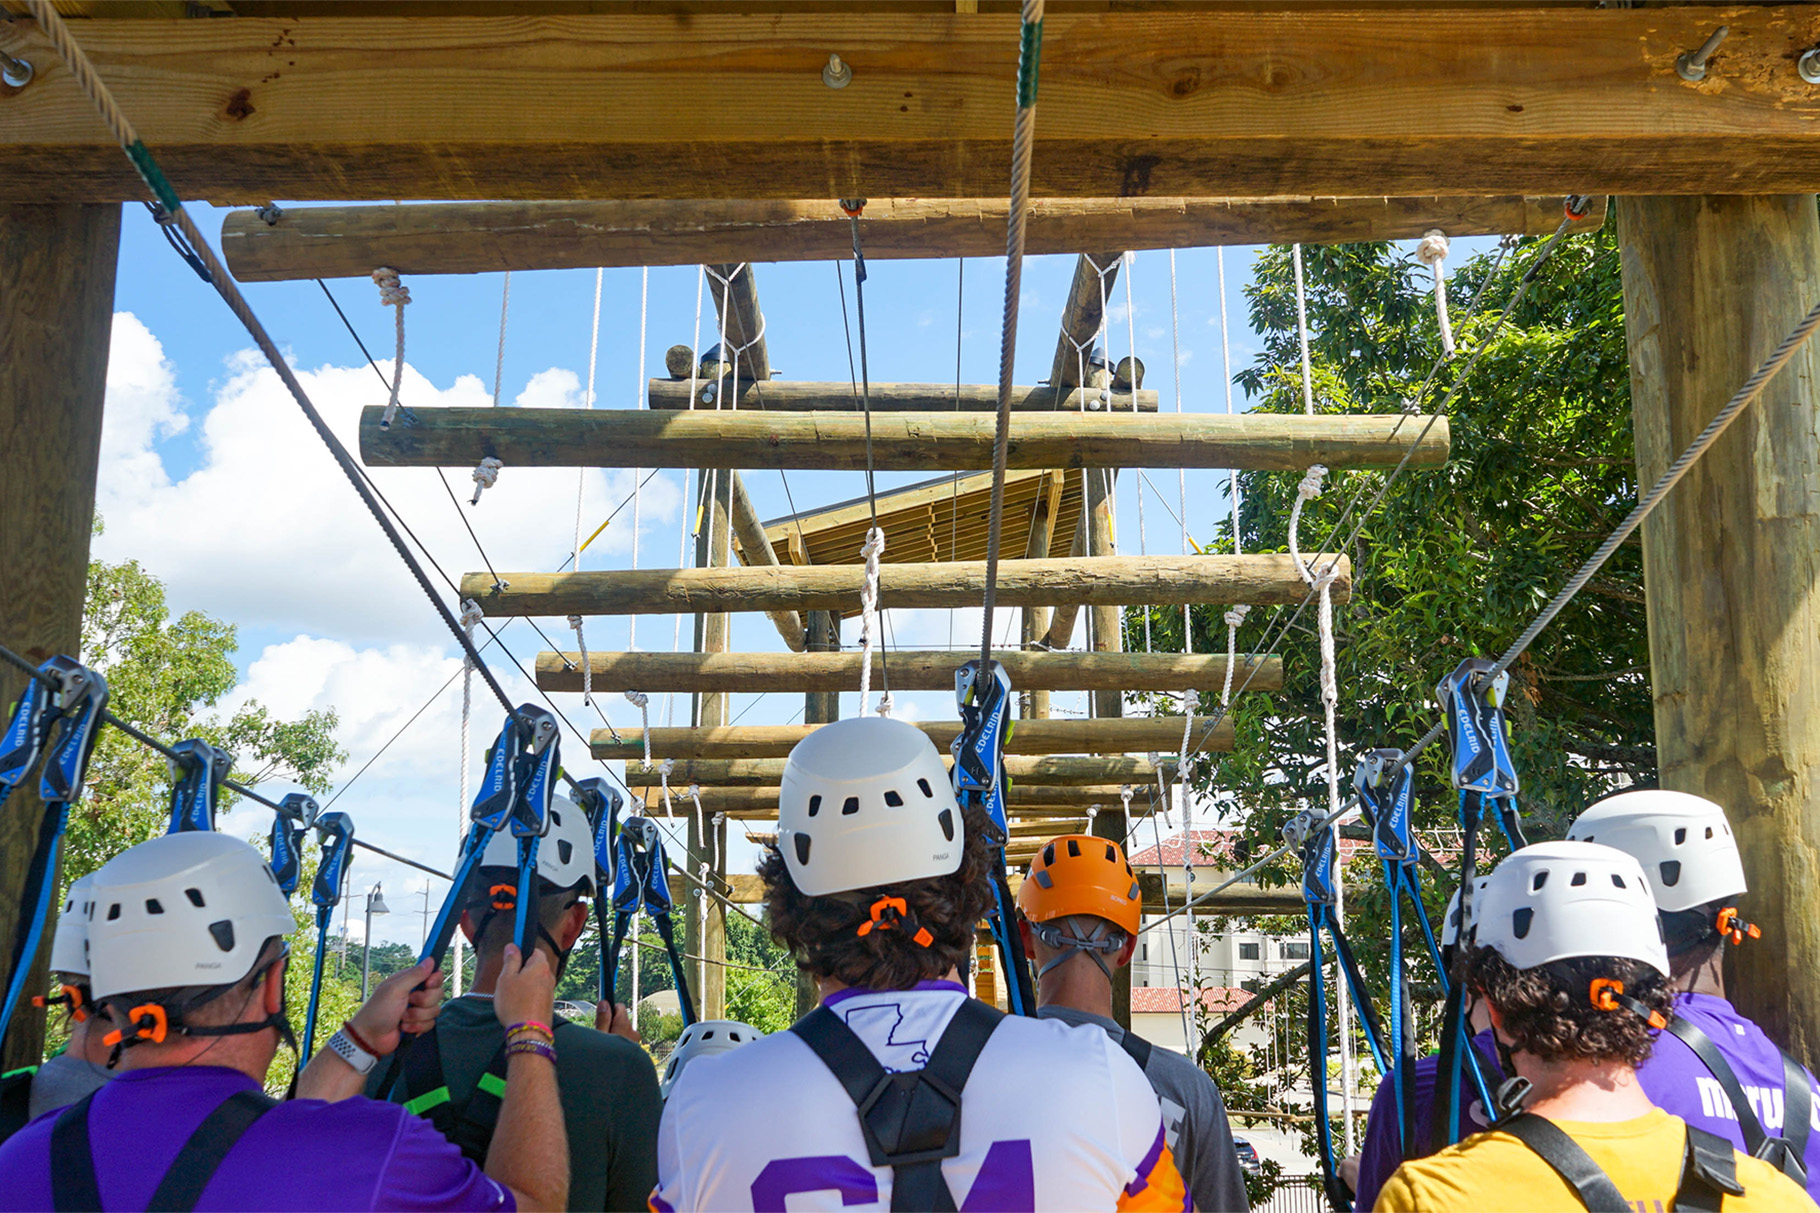 Patrons preparing to complete challenge course